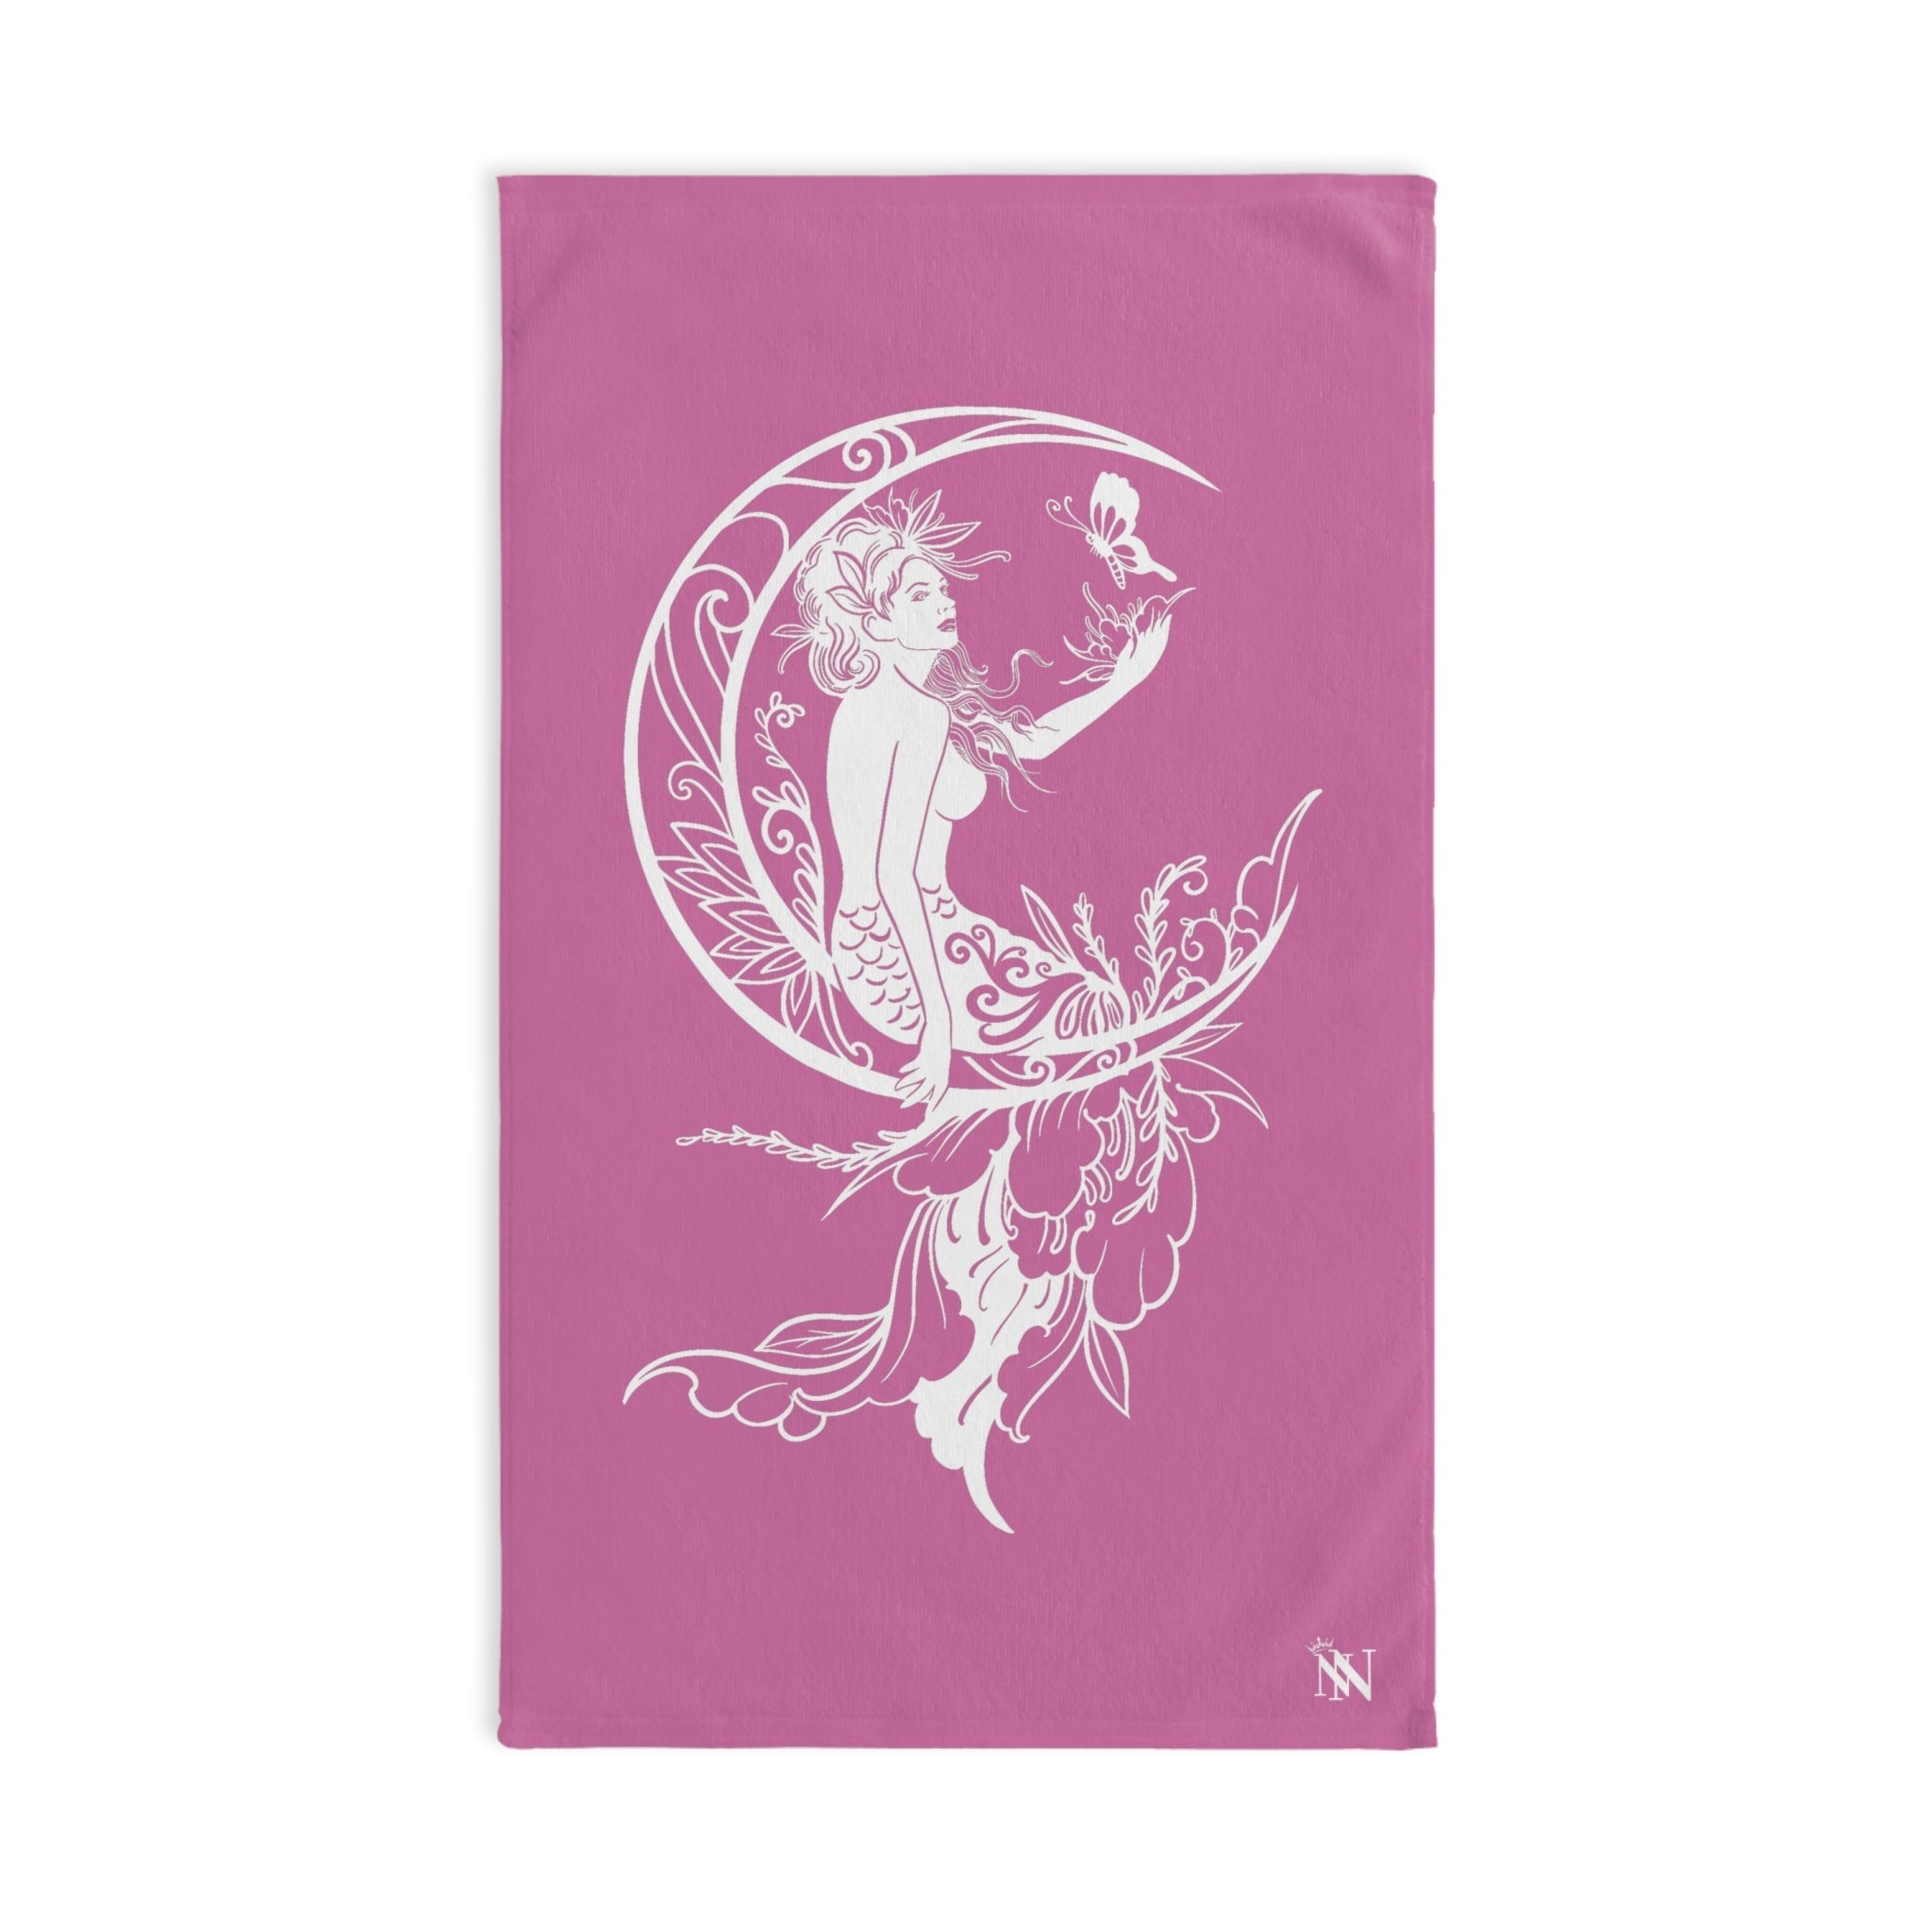 Moon Mermaid StarPink | Novelty Gifts for Boyfriend, Funny Towel Romantic Gift for Wedding Couple Fiance First Year Anniversary Valentines, Party Gag Gifts, Joke Humor Cloth for Husband Men BF NECTAR NAPKINS